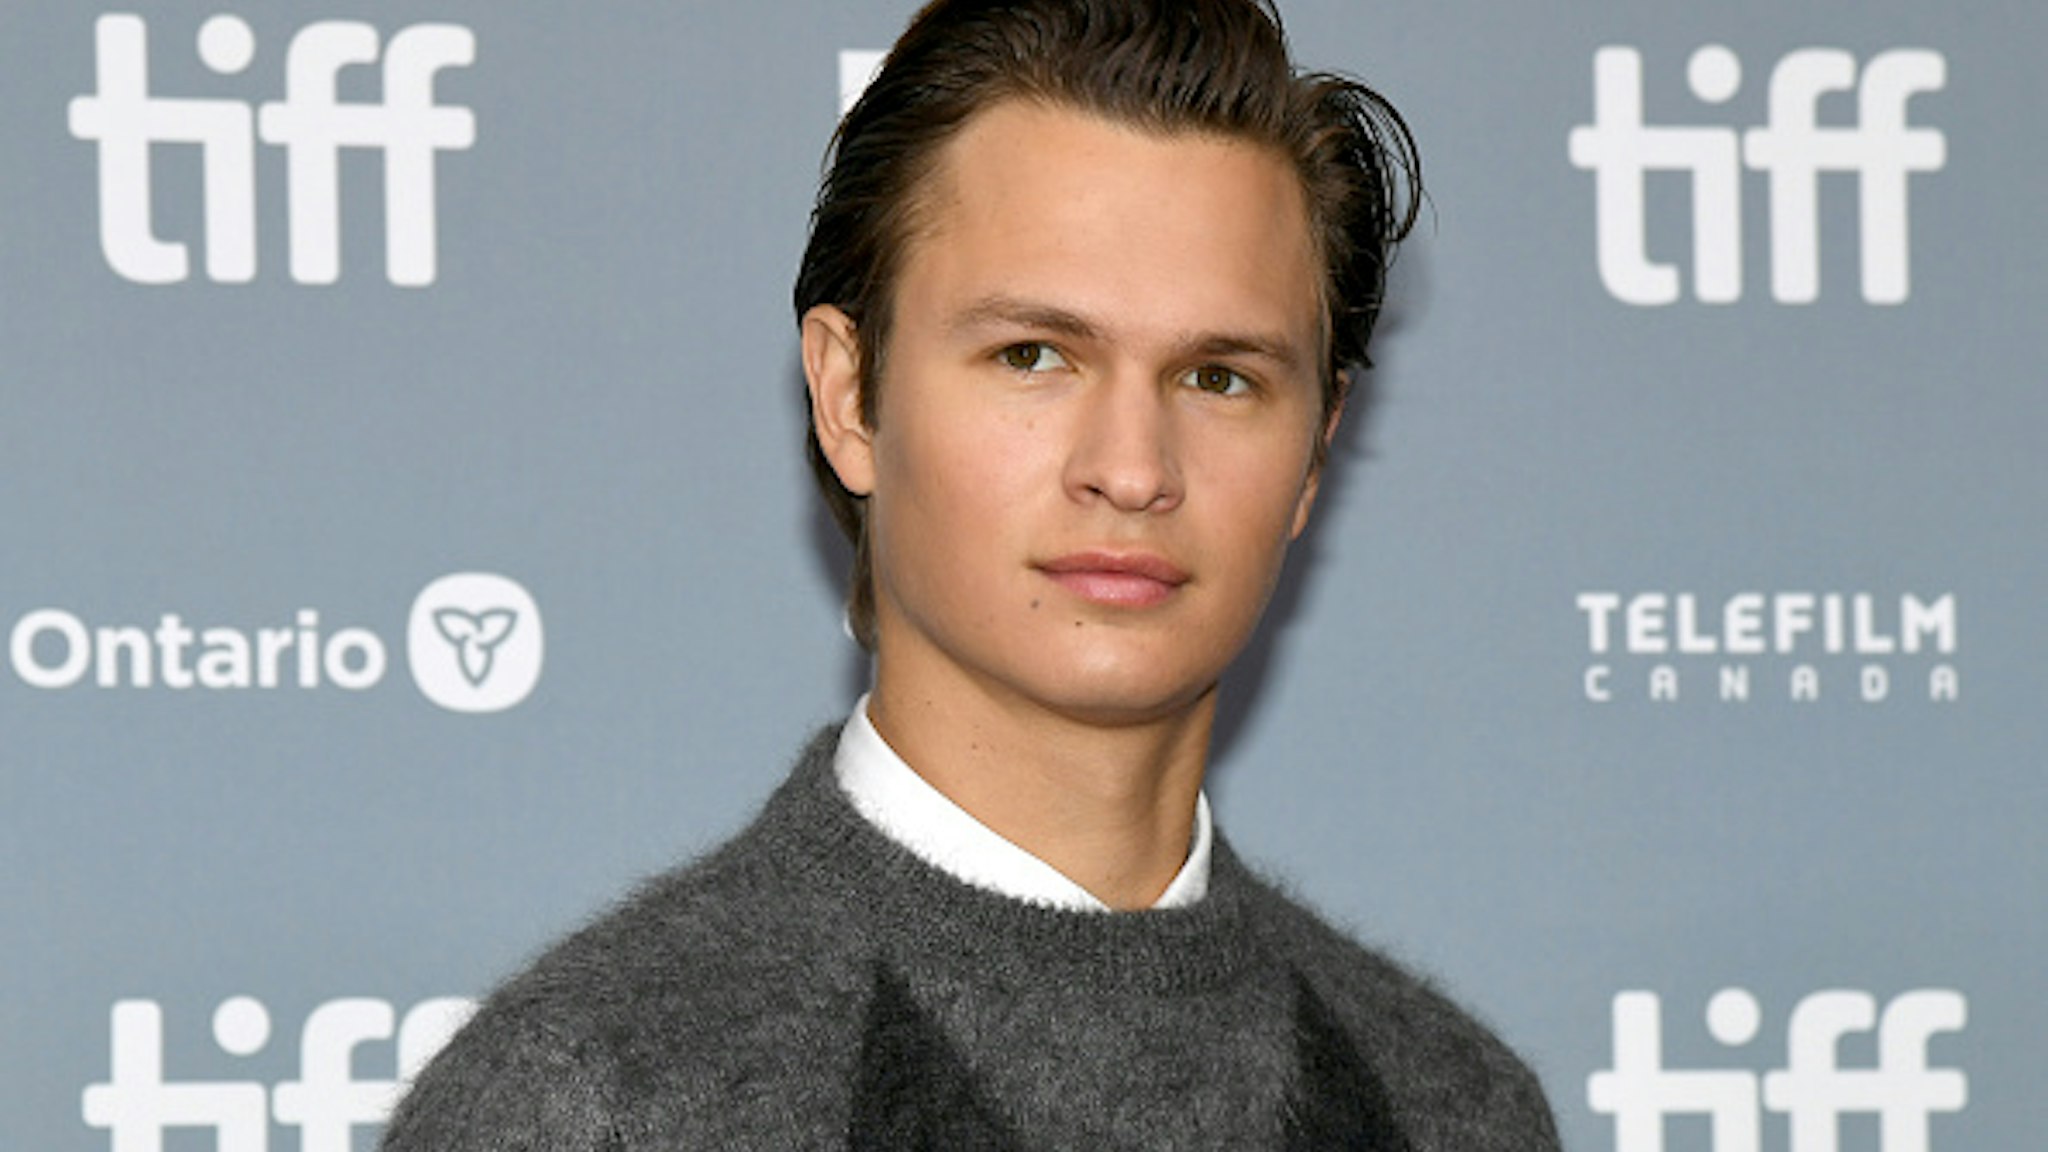 TORONTO, ONTARIO - SEPTEMBER 08: Ansel Elgort attends "The Goldfinch" press conference during the 2019 Toronto International Film Festival at TIFF Bell Lightbox on September 08, 2019 in Toronto, Canada.